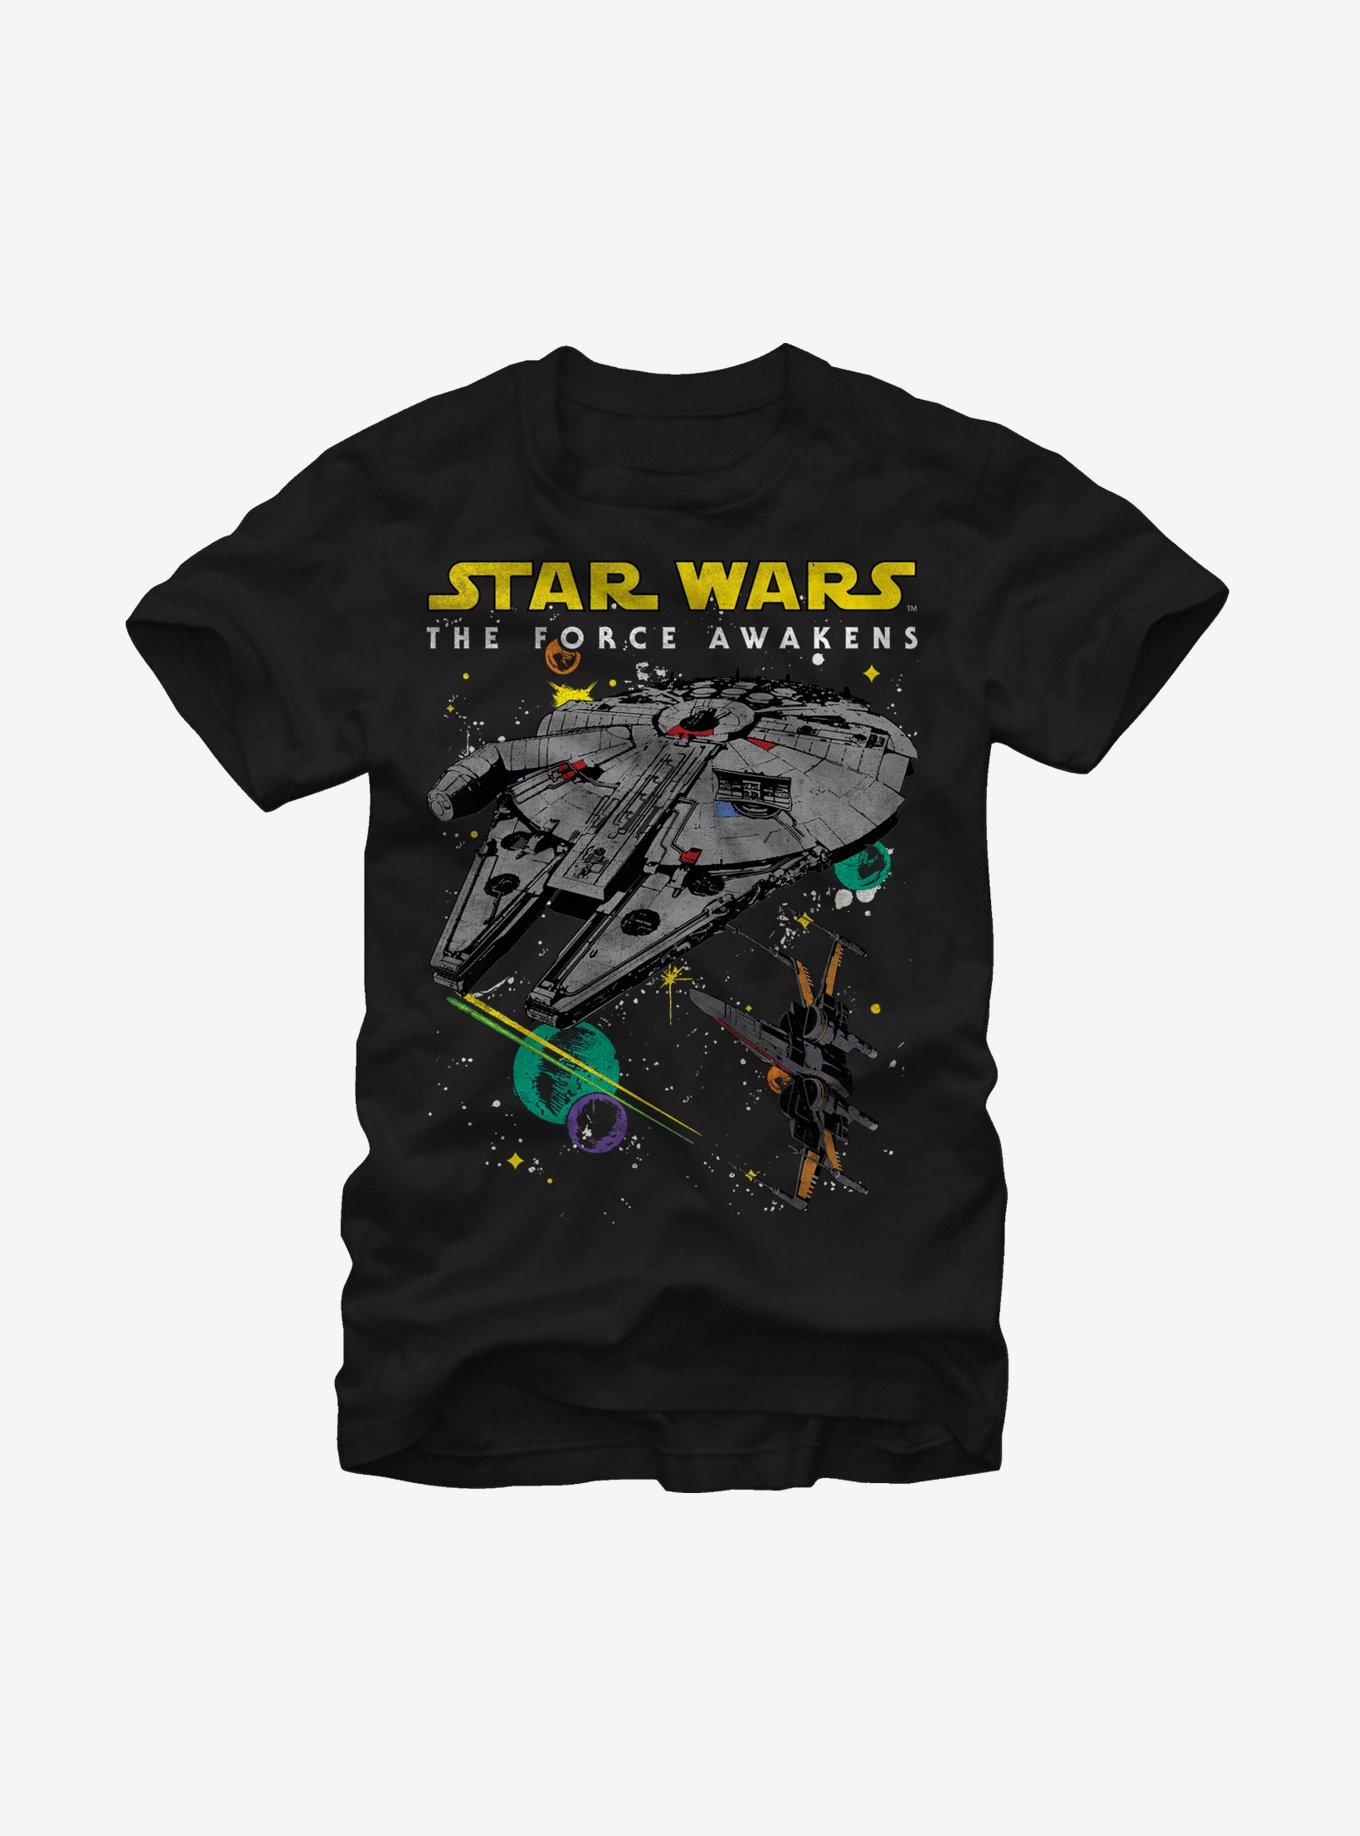 Star Wars Episode VII The Force Awakens Millennium Falcon and X-Wing T-Shirt